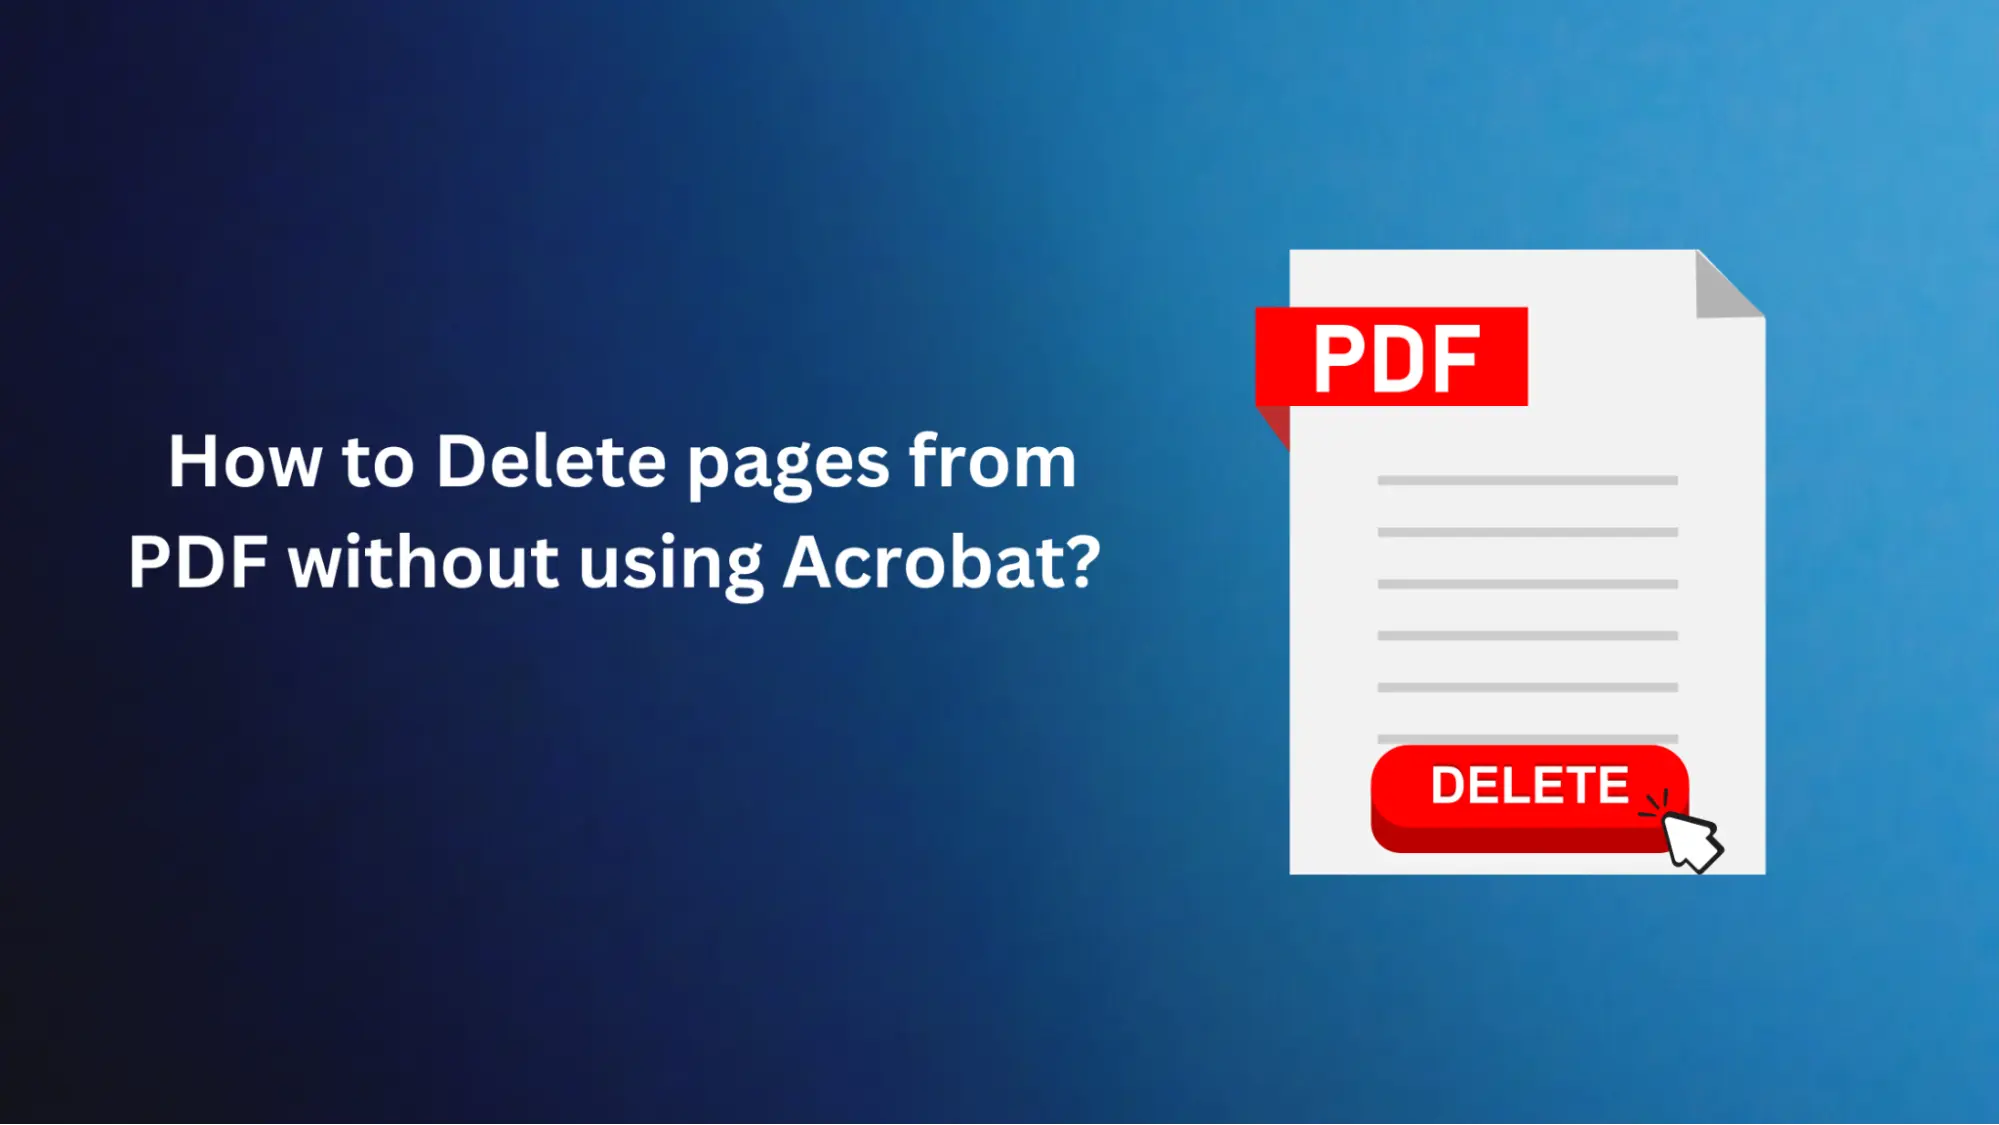 How to Delete pages from PDF without using Acrobat?